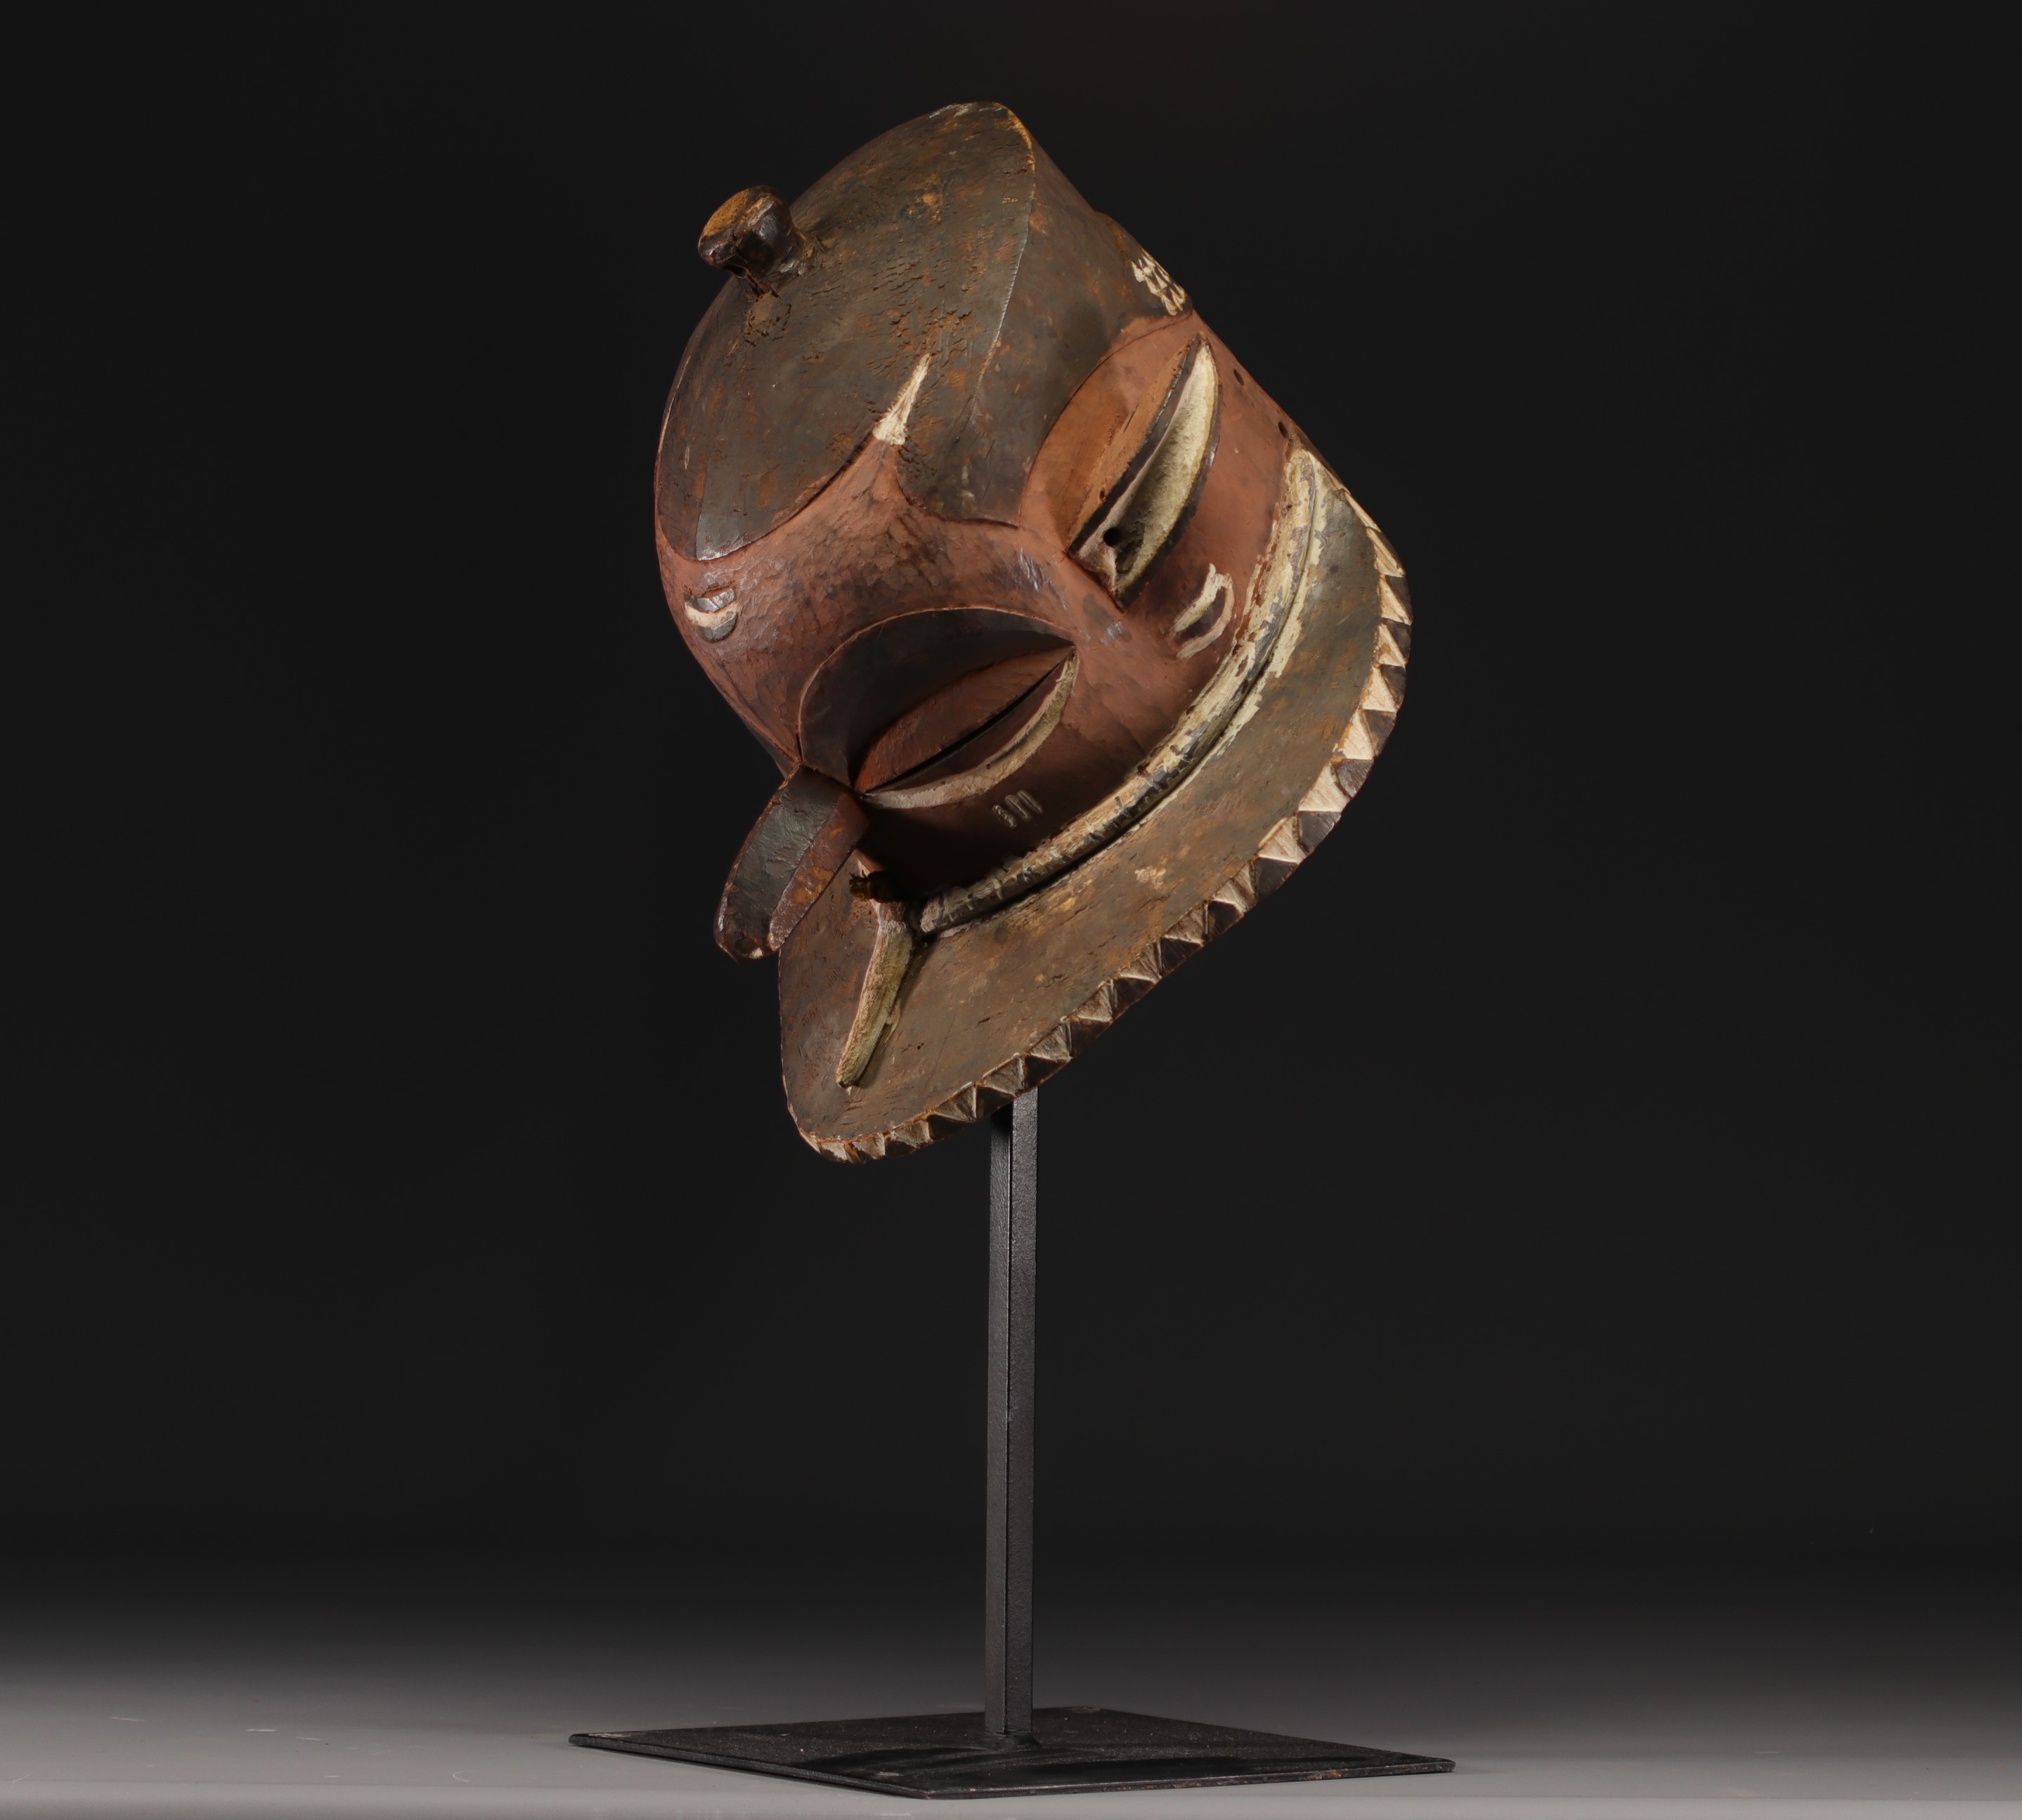 Eastern Pende mask - Dem.Rep.Congo - Image 6 of 7